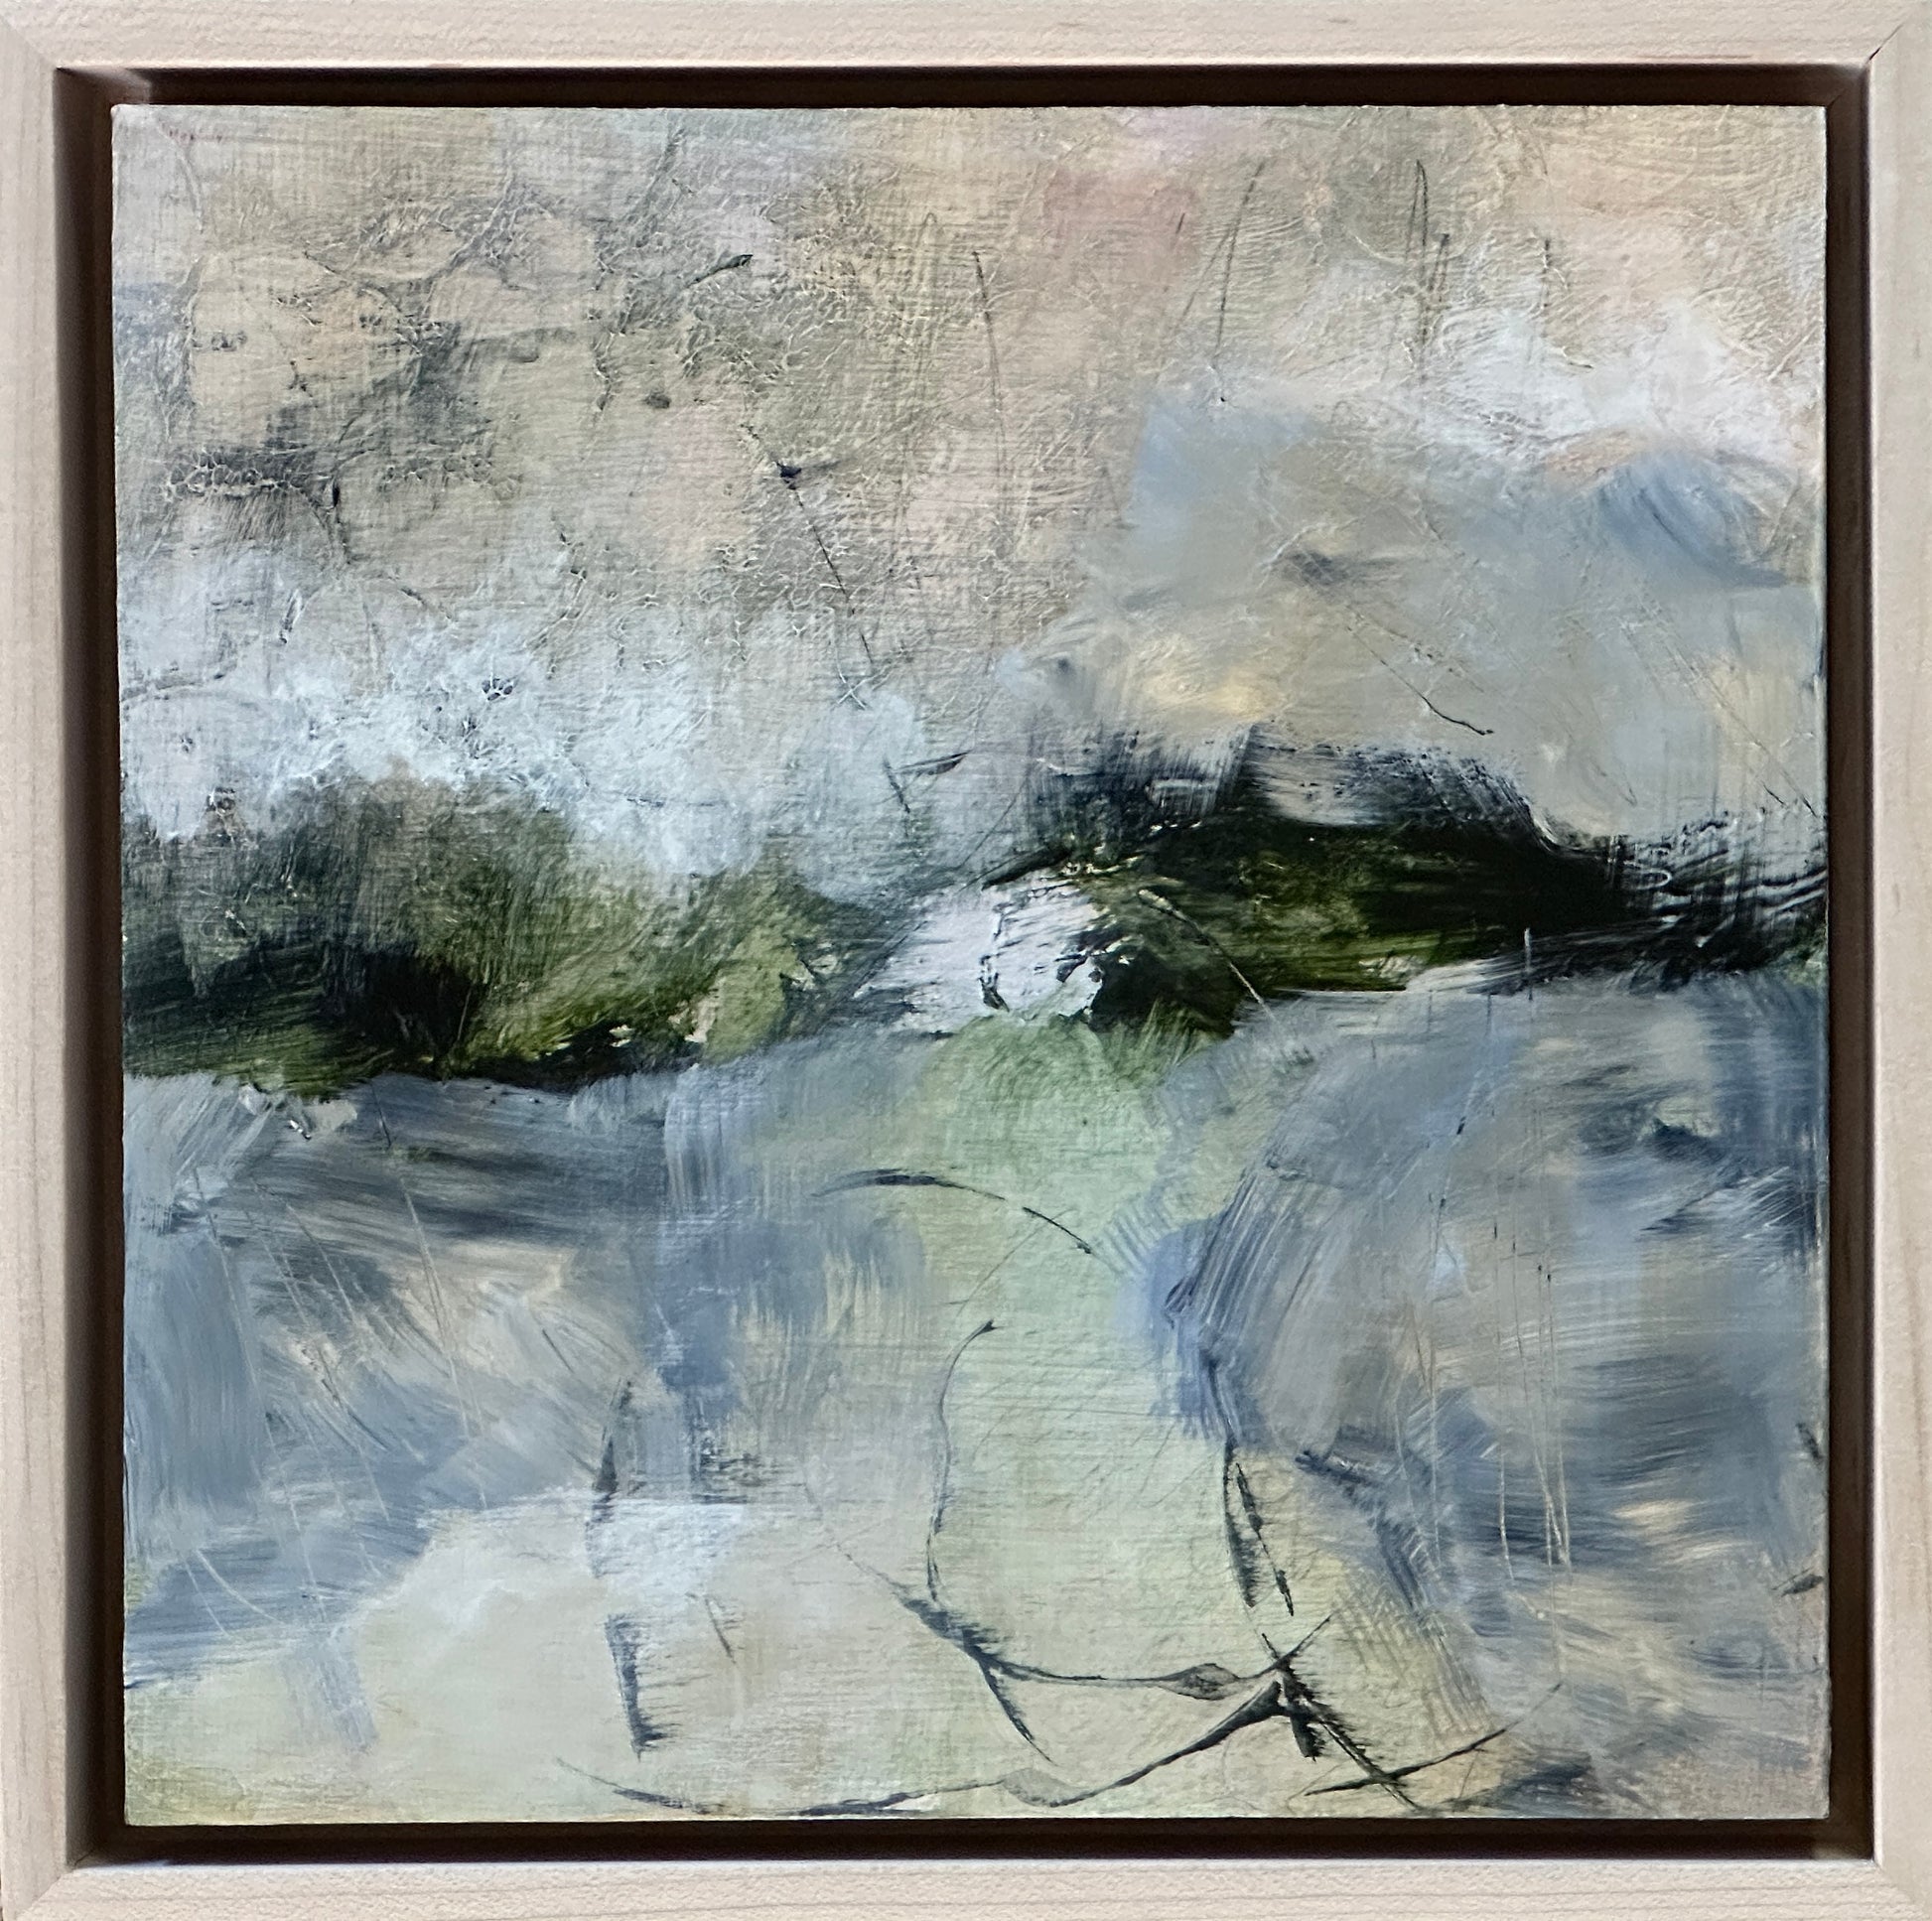 8 x 8 x 1.5-inch, Framed impression of a cloudy, rainy day on the Toccoa River.  Acrylic painting on cradled panel with natural wood frame.  By Cumming, GA artist, Juanita Bellavance. Part of our 25 Days of Minis 2022 collection.  Collect them all!